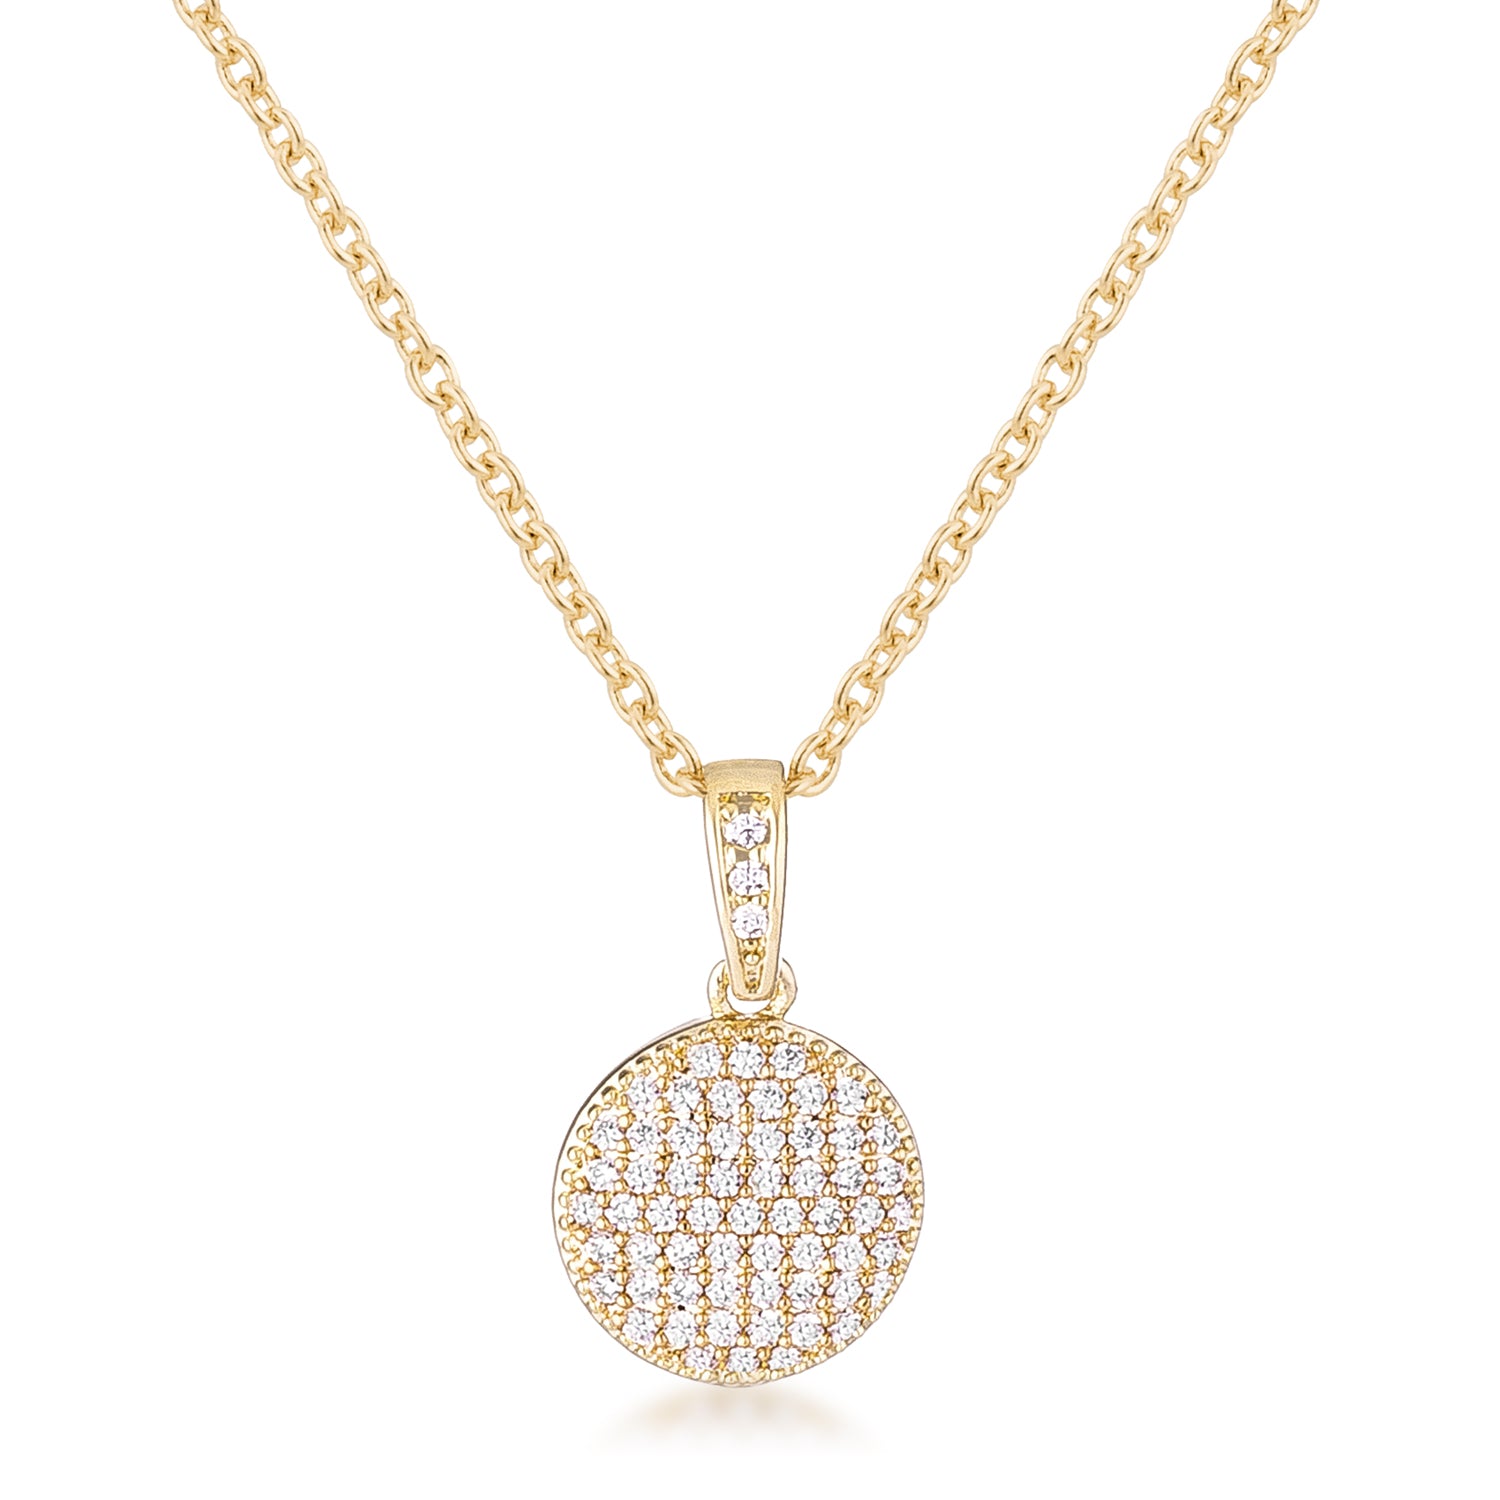 14K Gold Disc Necklace | Royal Chain Group